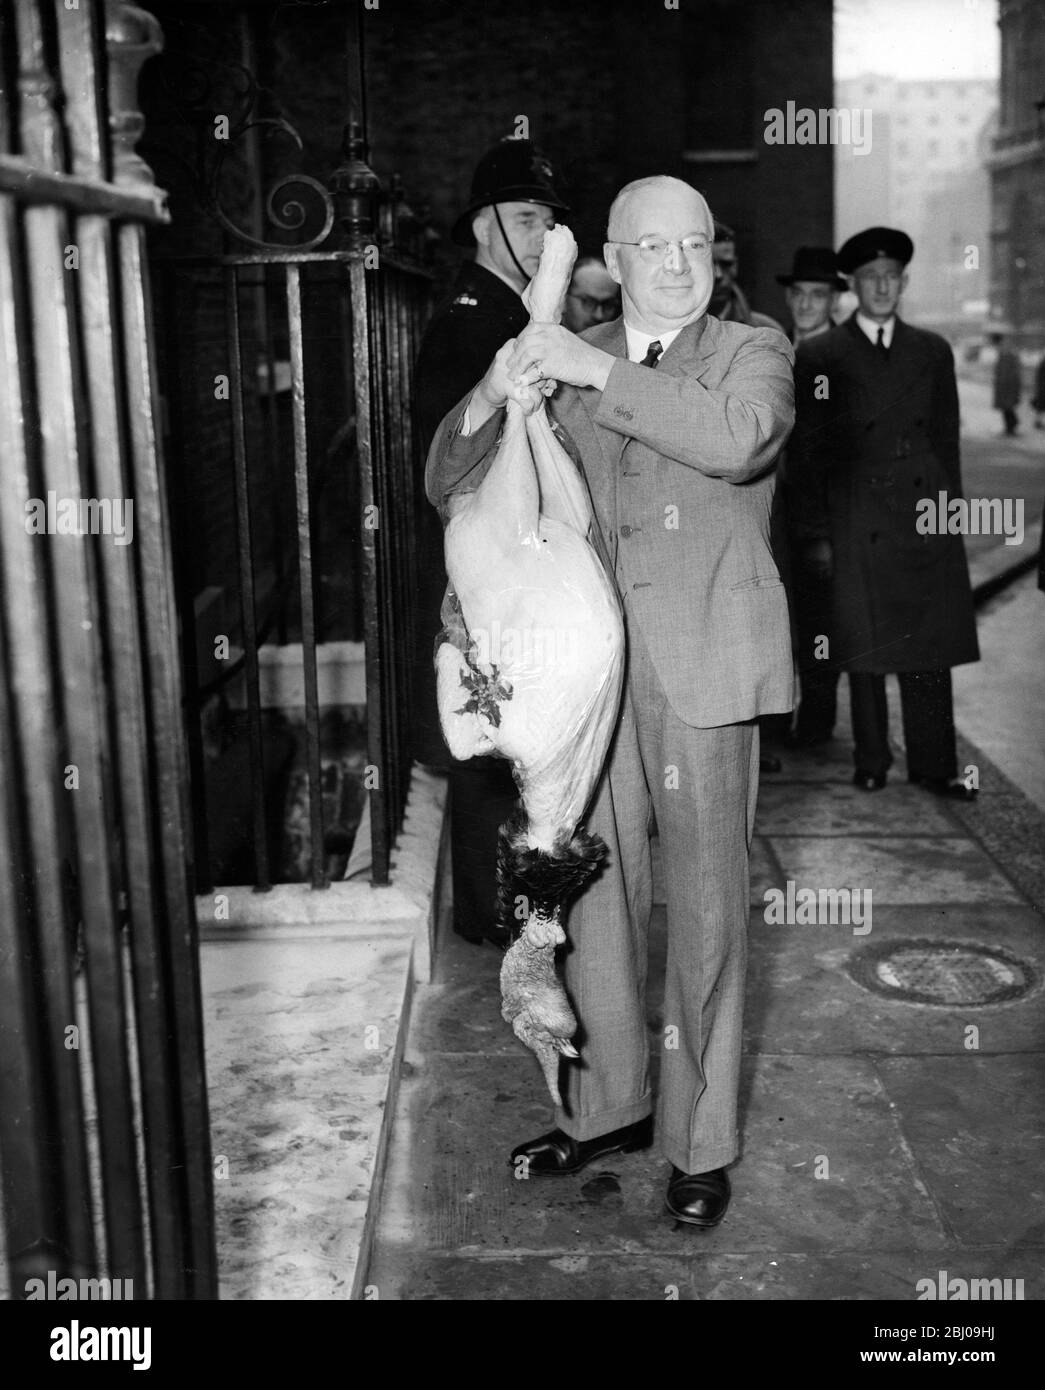 Colonel A.M. Melville , Vice President of the British Turkey Federation , holds up a 40 lbs turkey as a gift to Prime Minister Sir Winston Churchill - 10 Downing Street, London, England - 22 December 1953 Stock Photo